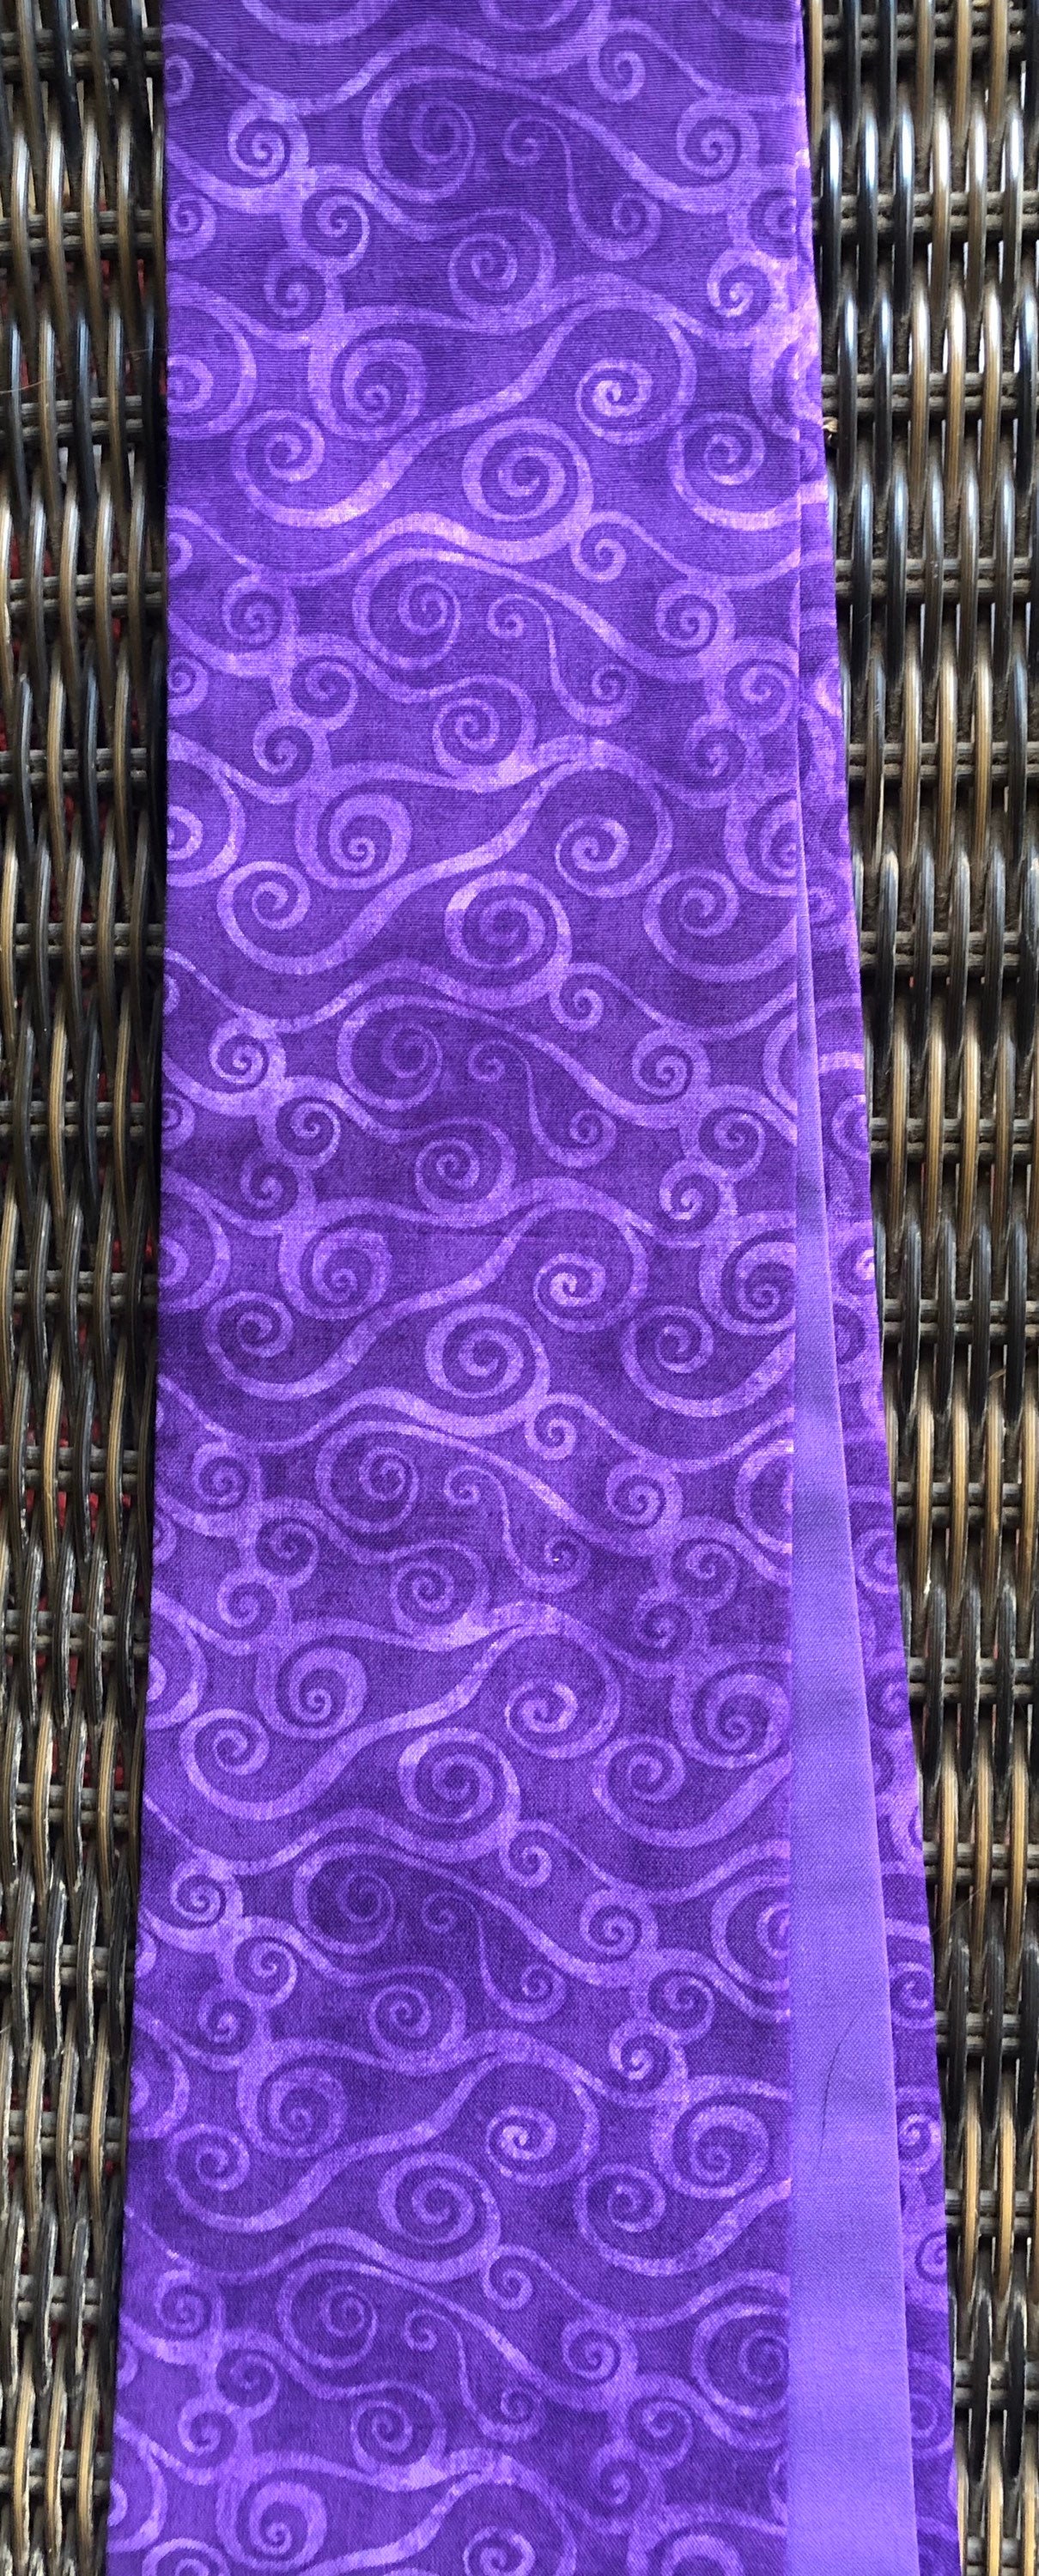 Ready to ship Clergy stole in purple wonderful spiral | Etsy